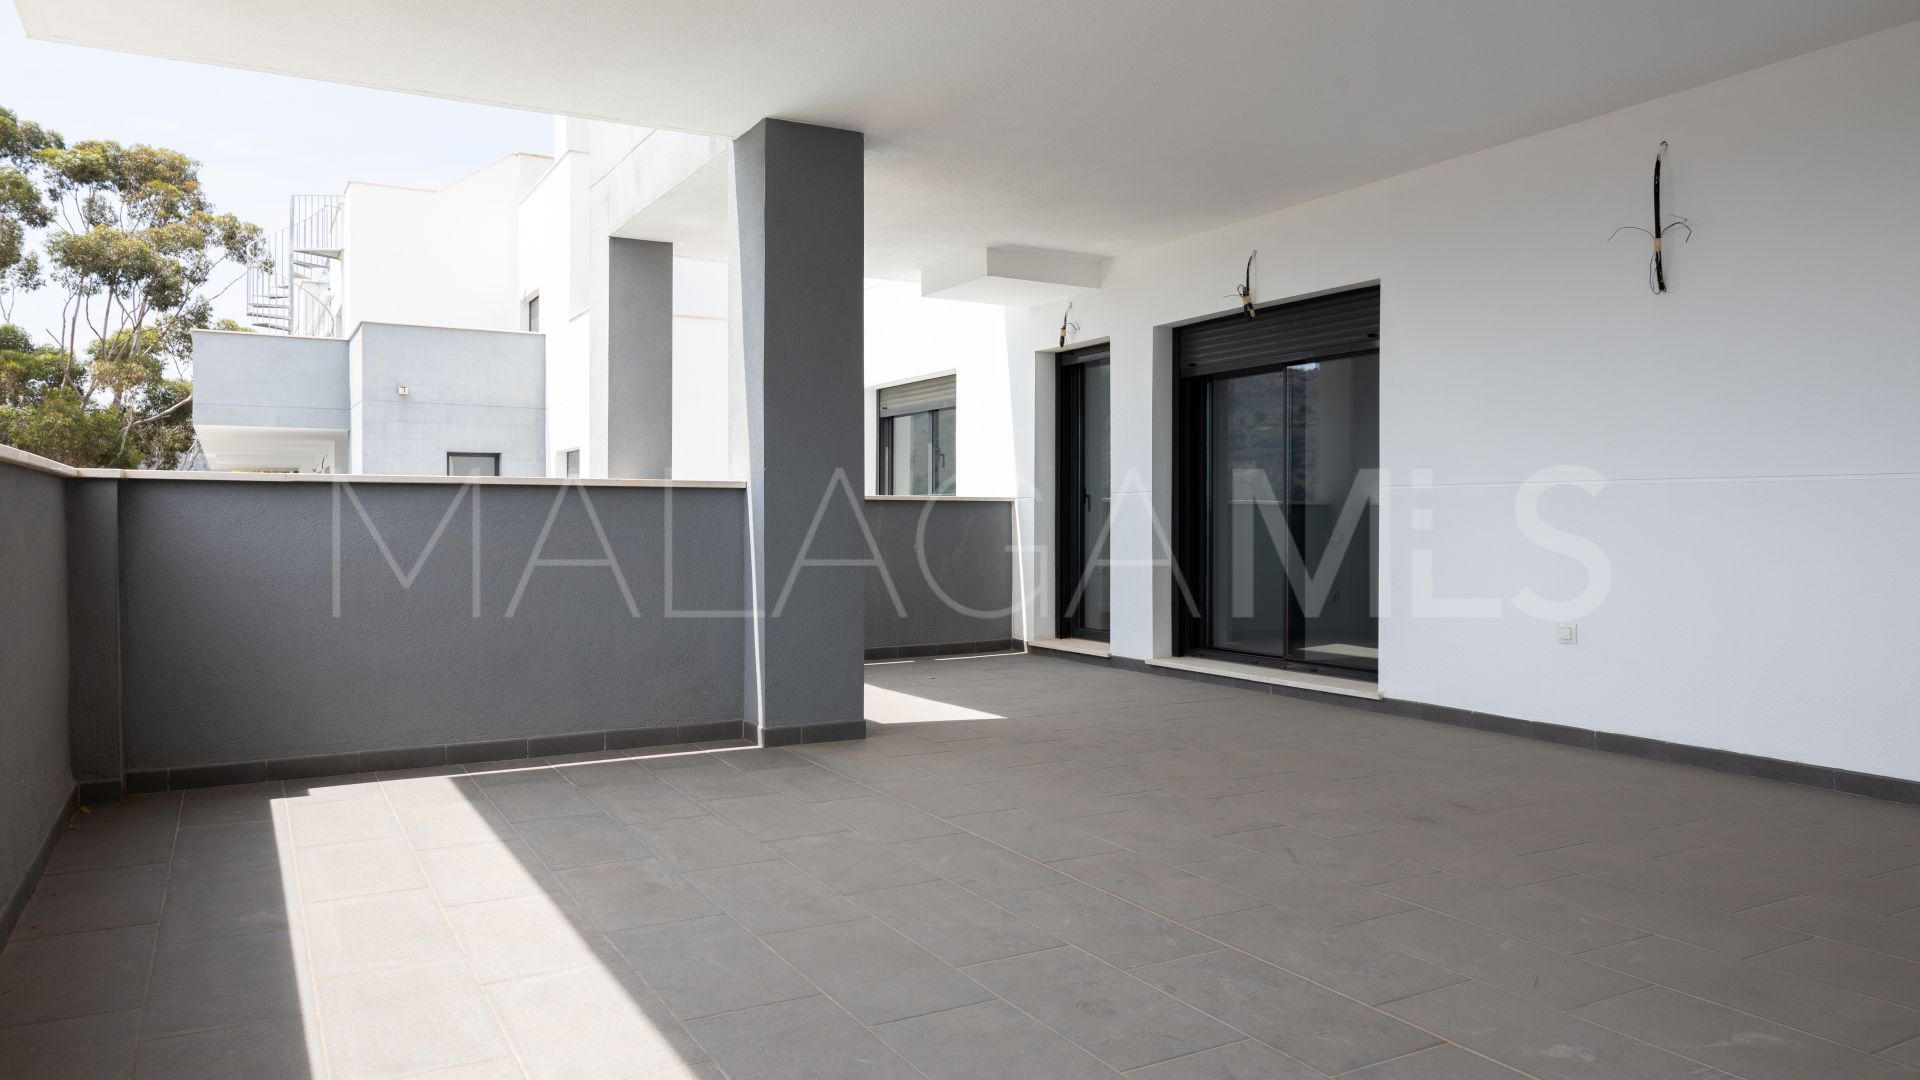 Ground floor apartment for sale in El Limonar with 3 bedrooms